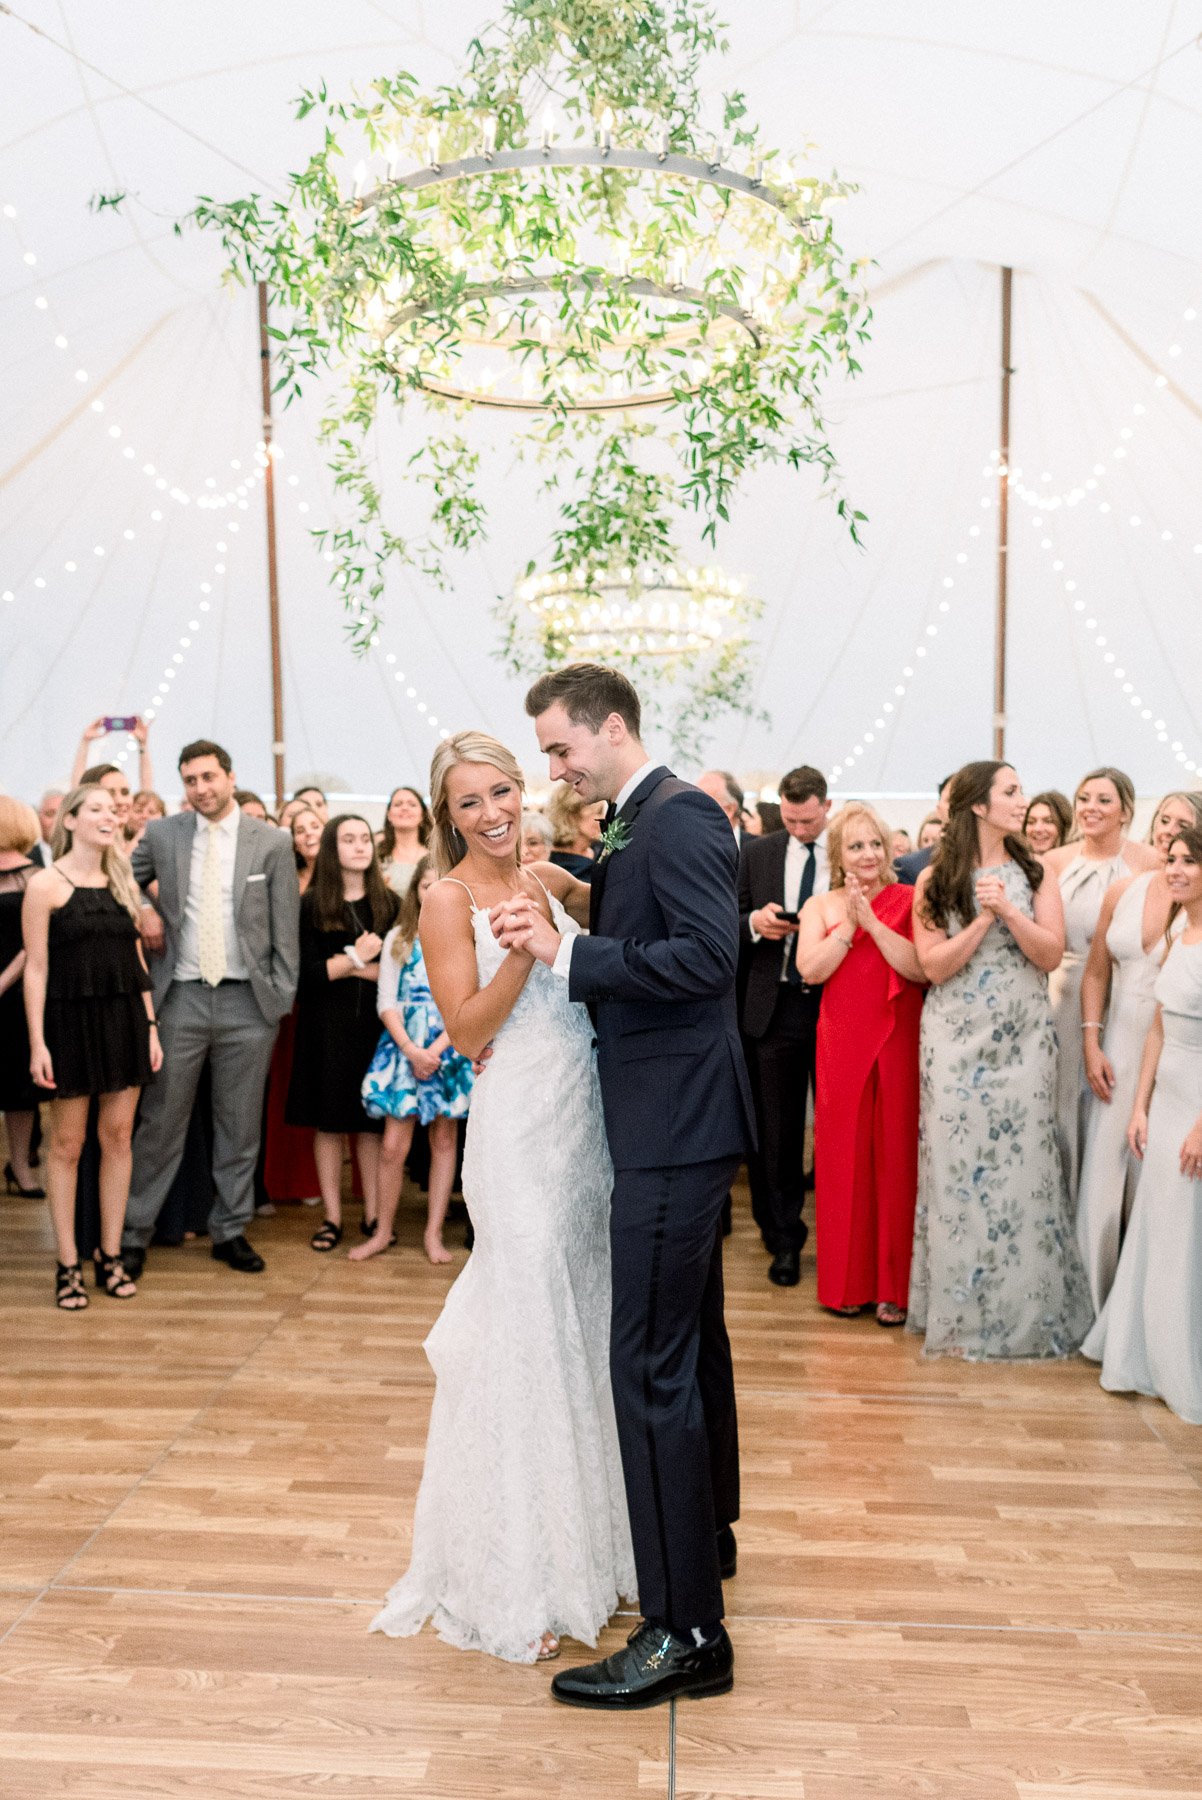 Private Island Upstate NY Wedding by Michelle Lange Photography-77.jpg